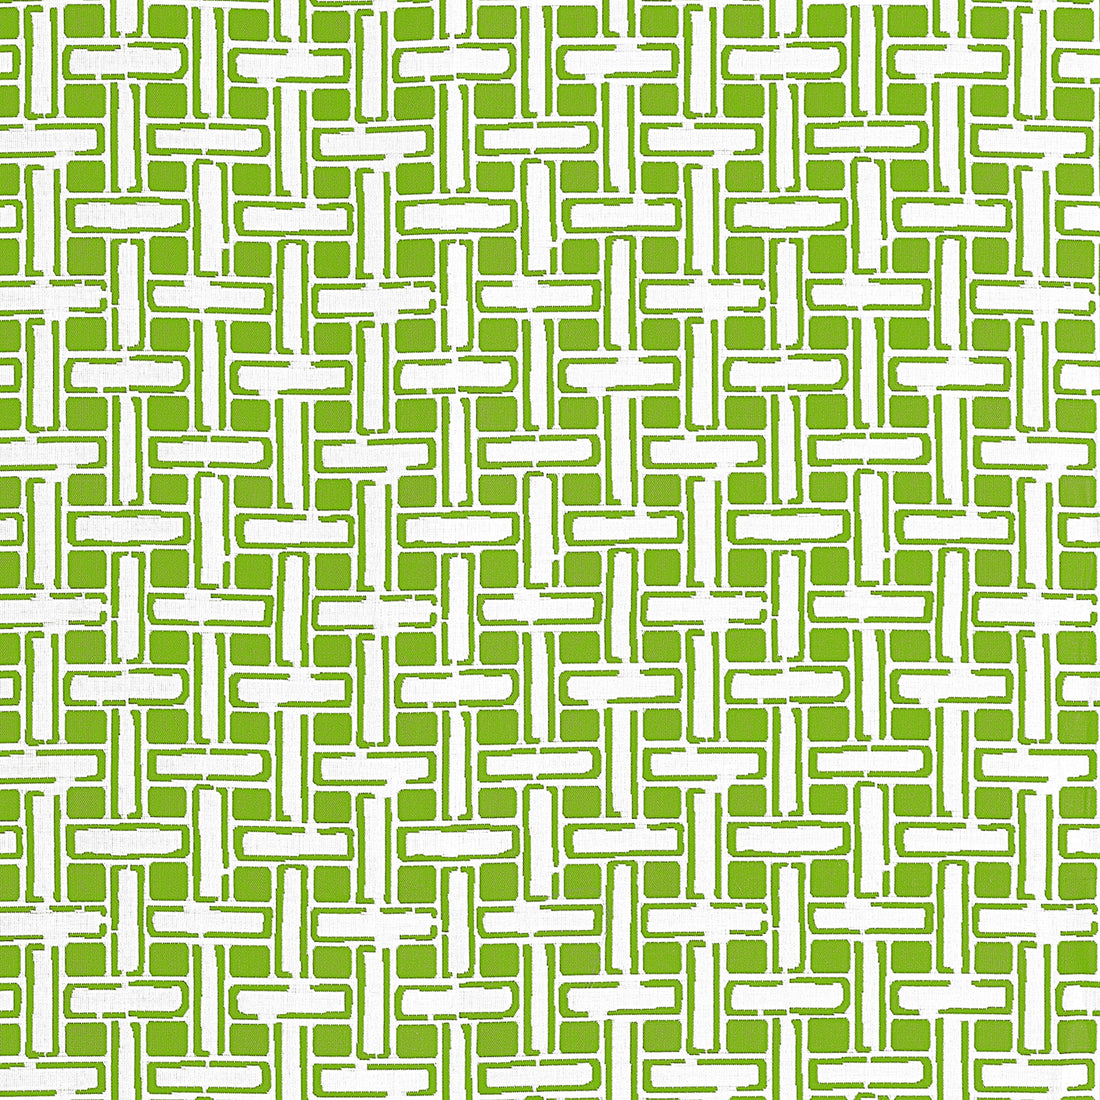 Panama Matelasse fabric in kiwi color - pattern number W81640 - by Thibaut in the Locale collection